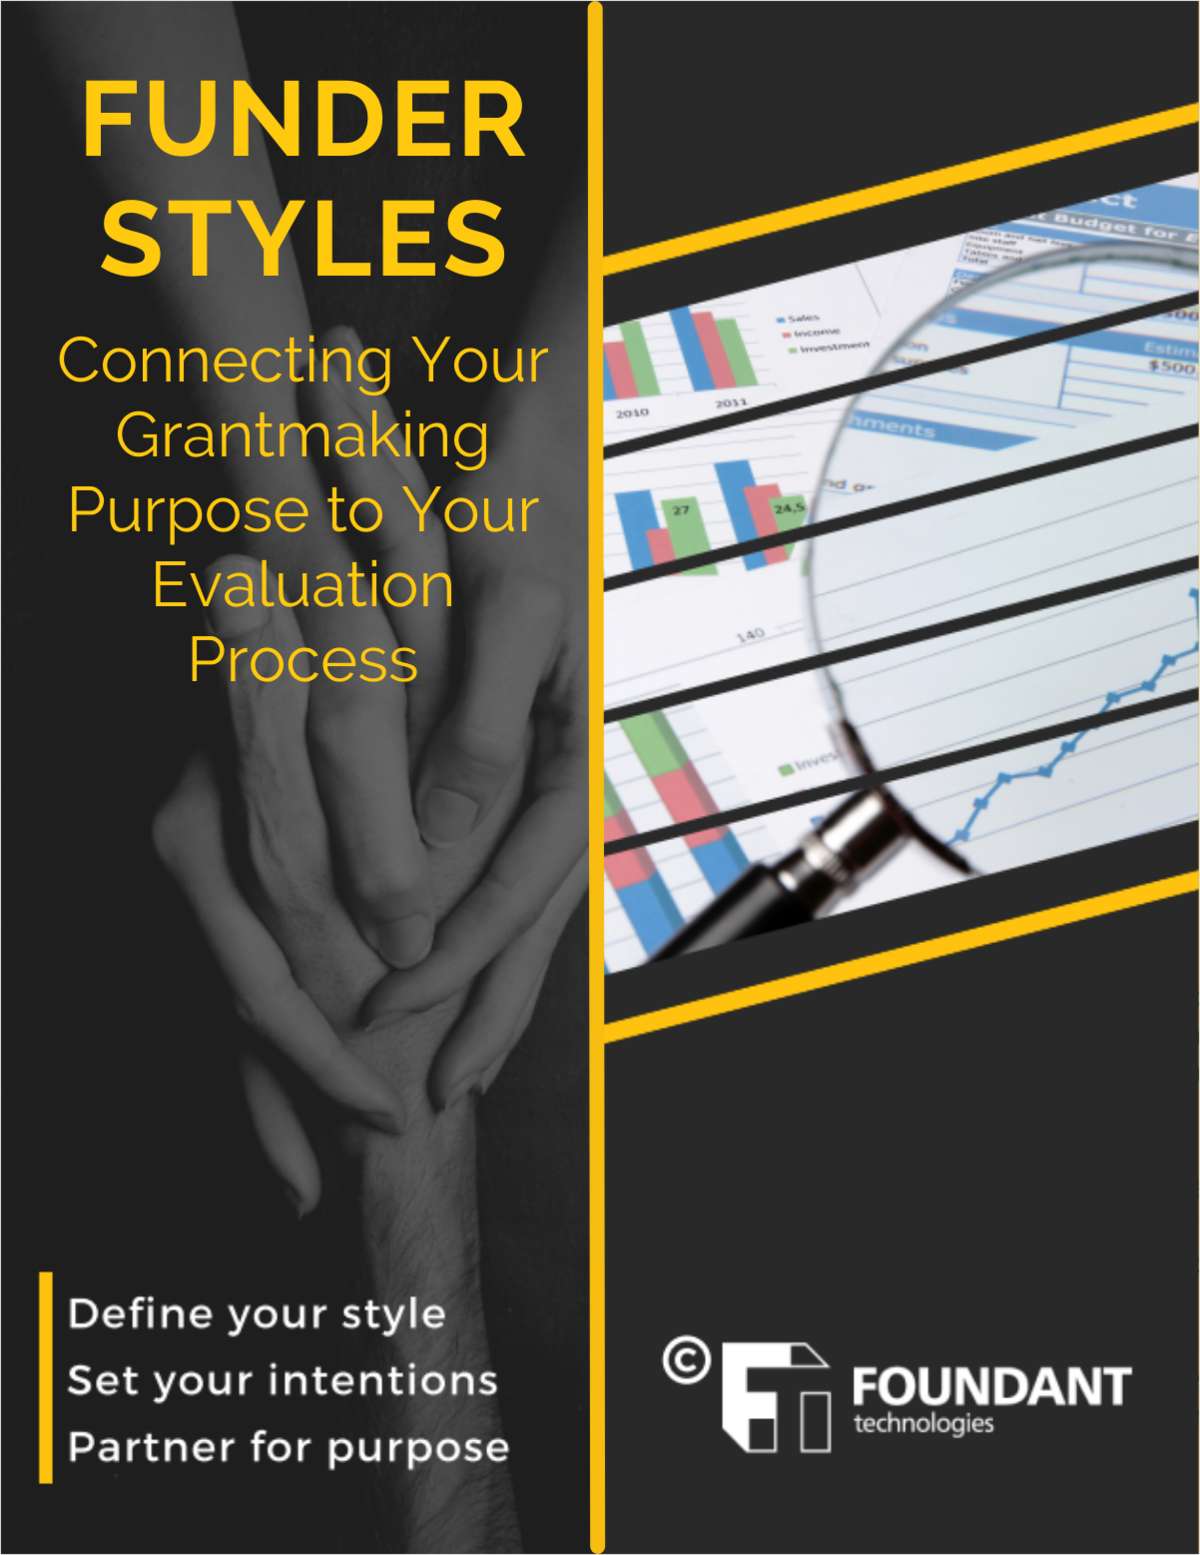 Funder Styles: Connecting Purpose to Evaluation